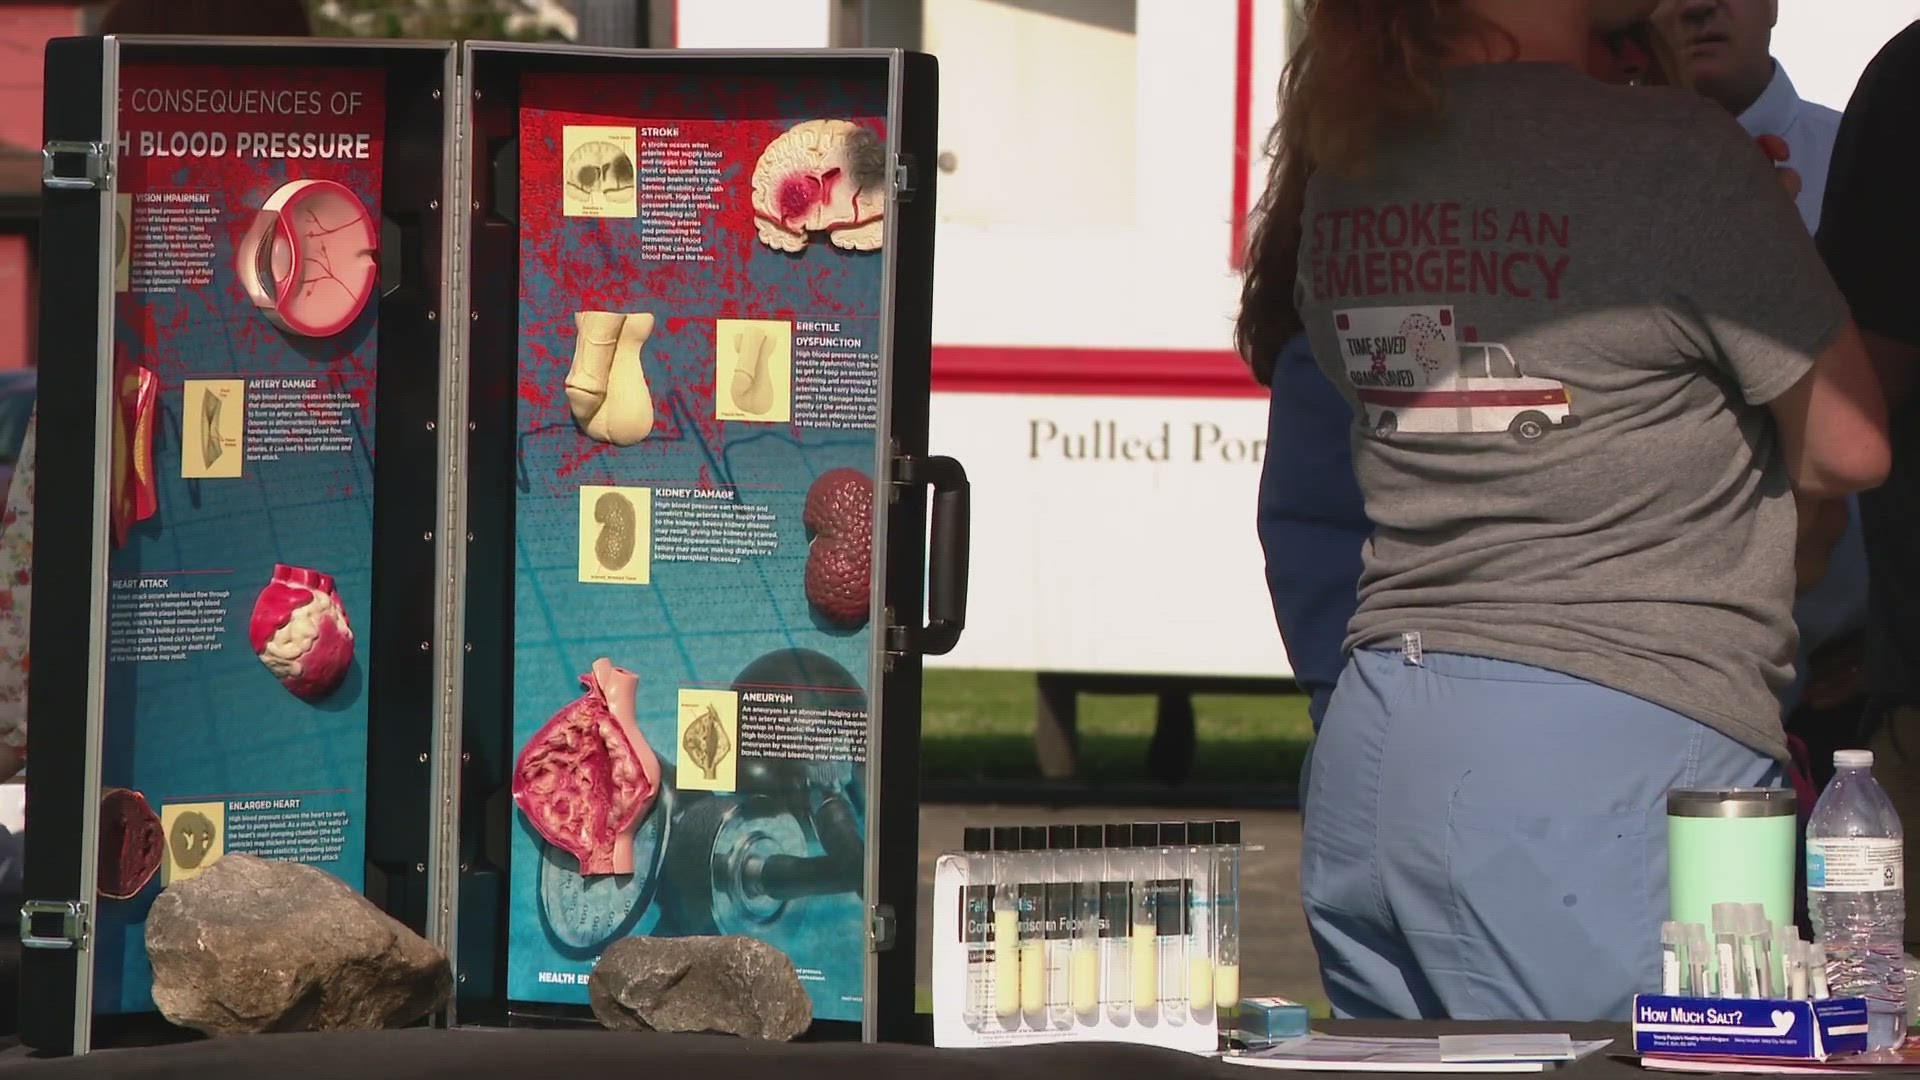 'Stroke Smart Fest' was designed to educate the community about strokes.